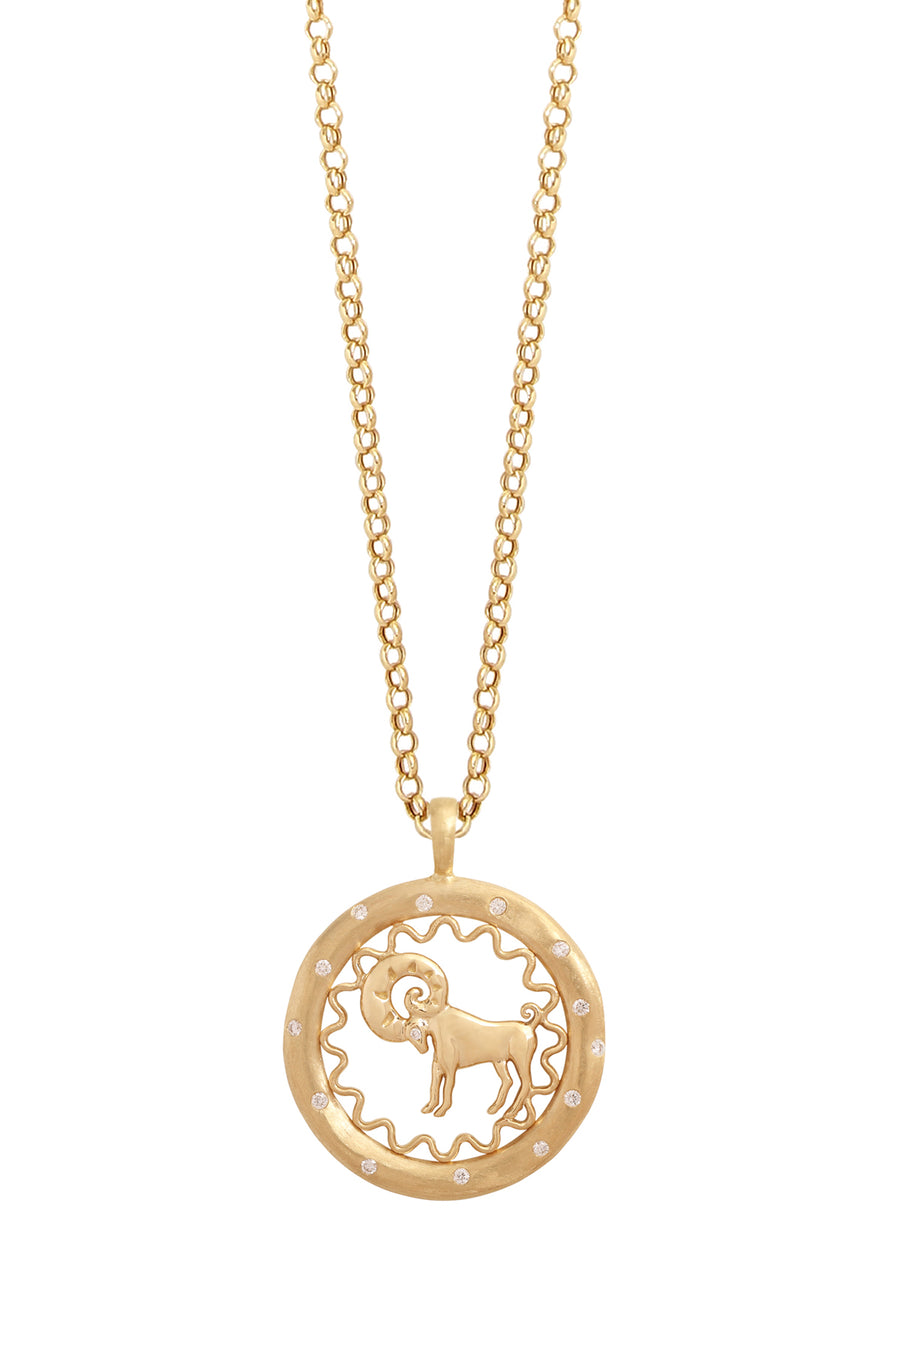 The Aries Necklace